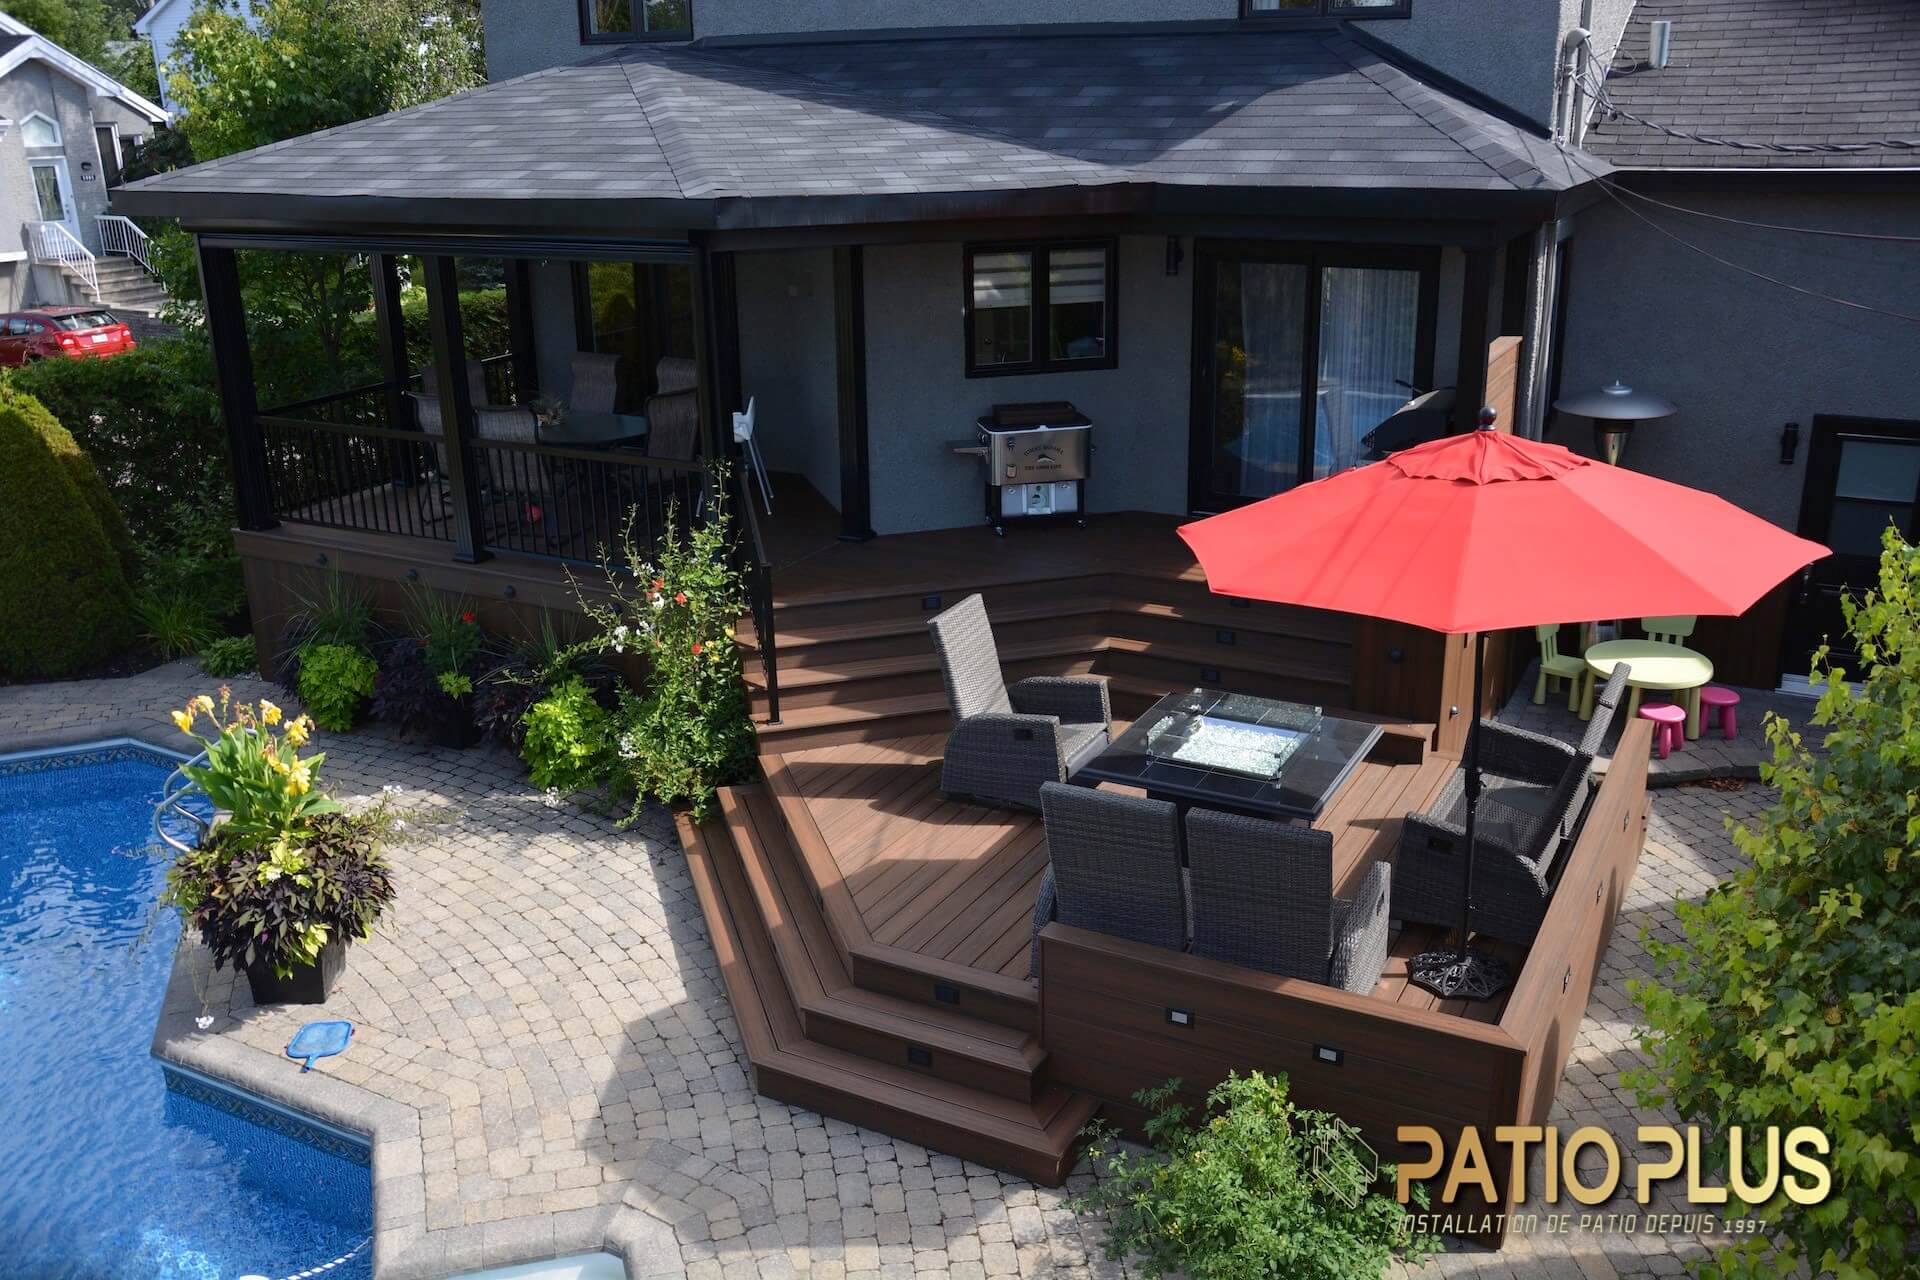 A contemporary design concept of patios with rooftop